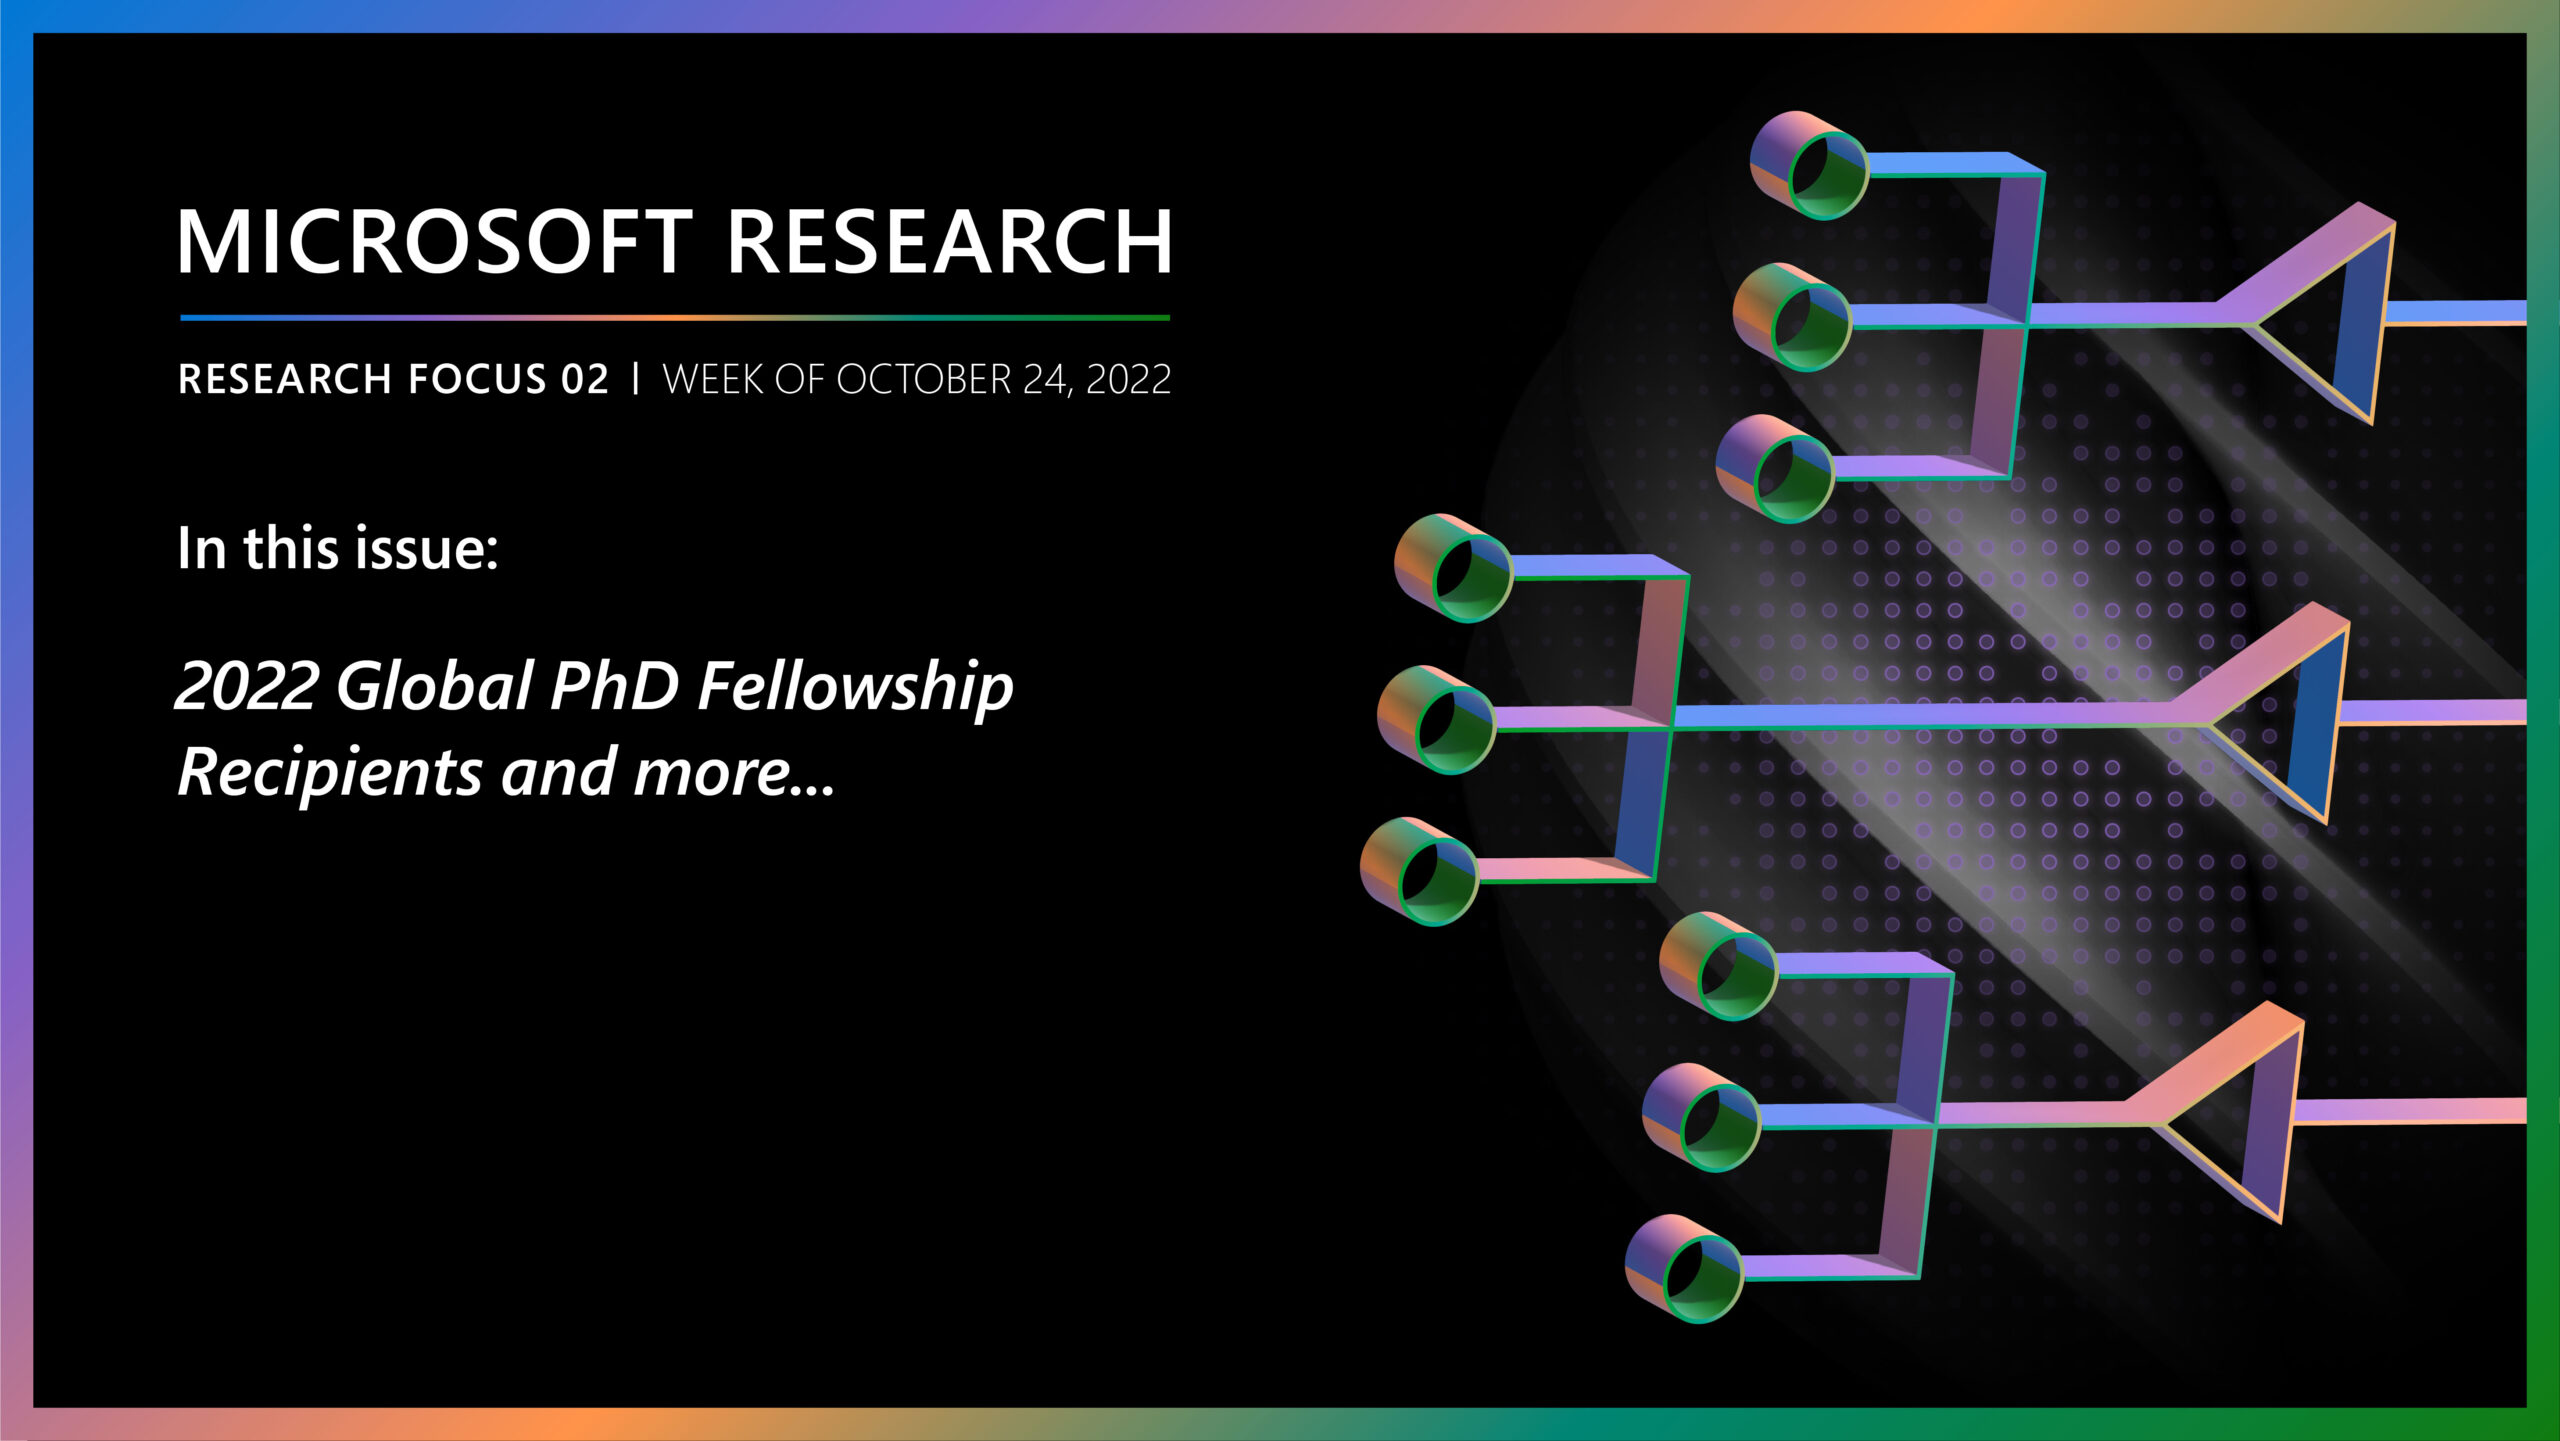 Research Focus 02 - 2022 Global PhD Fellowship rEciepients and more...